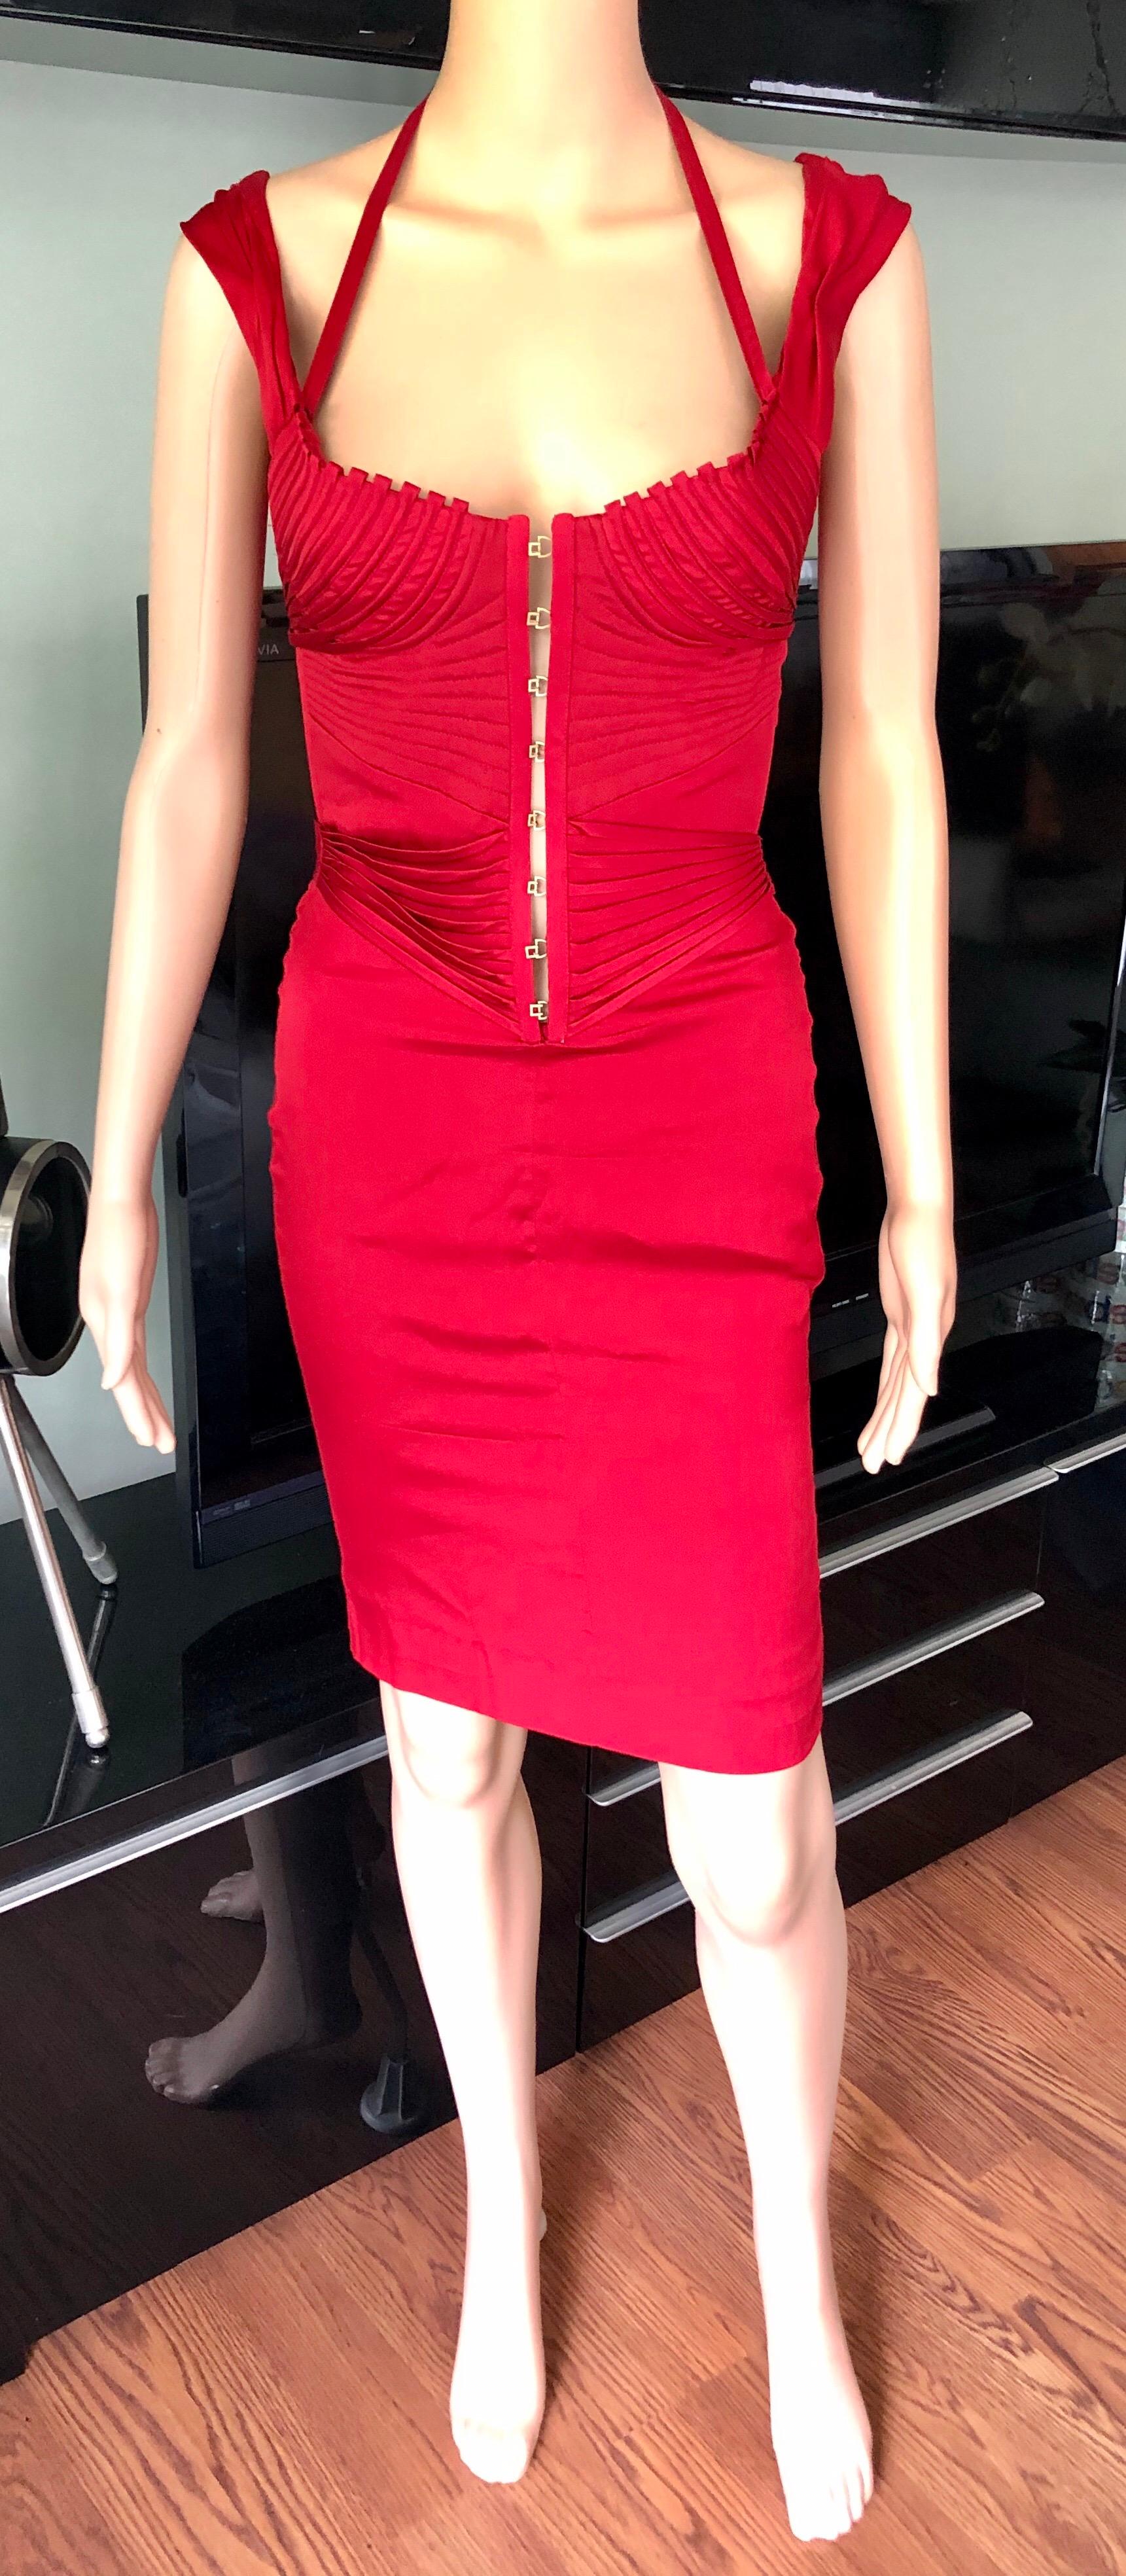 2003 tom ford for gucci red dress